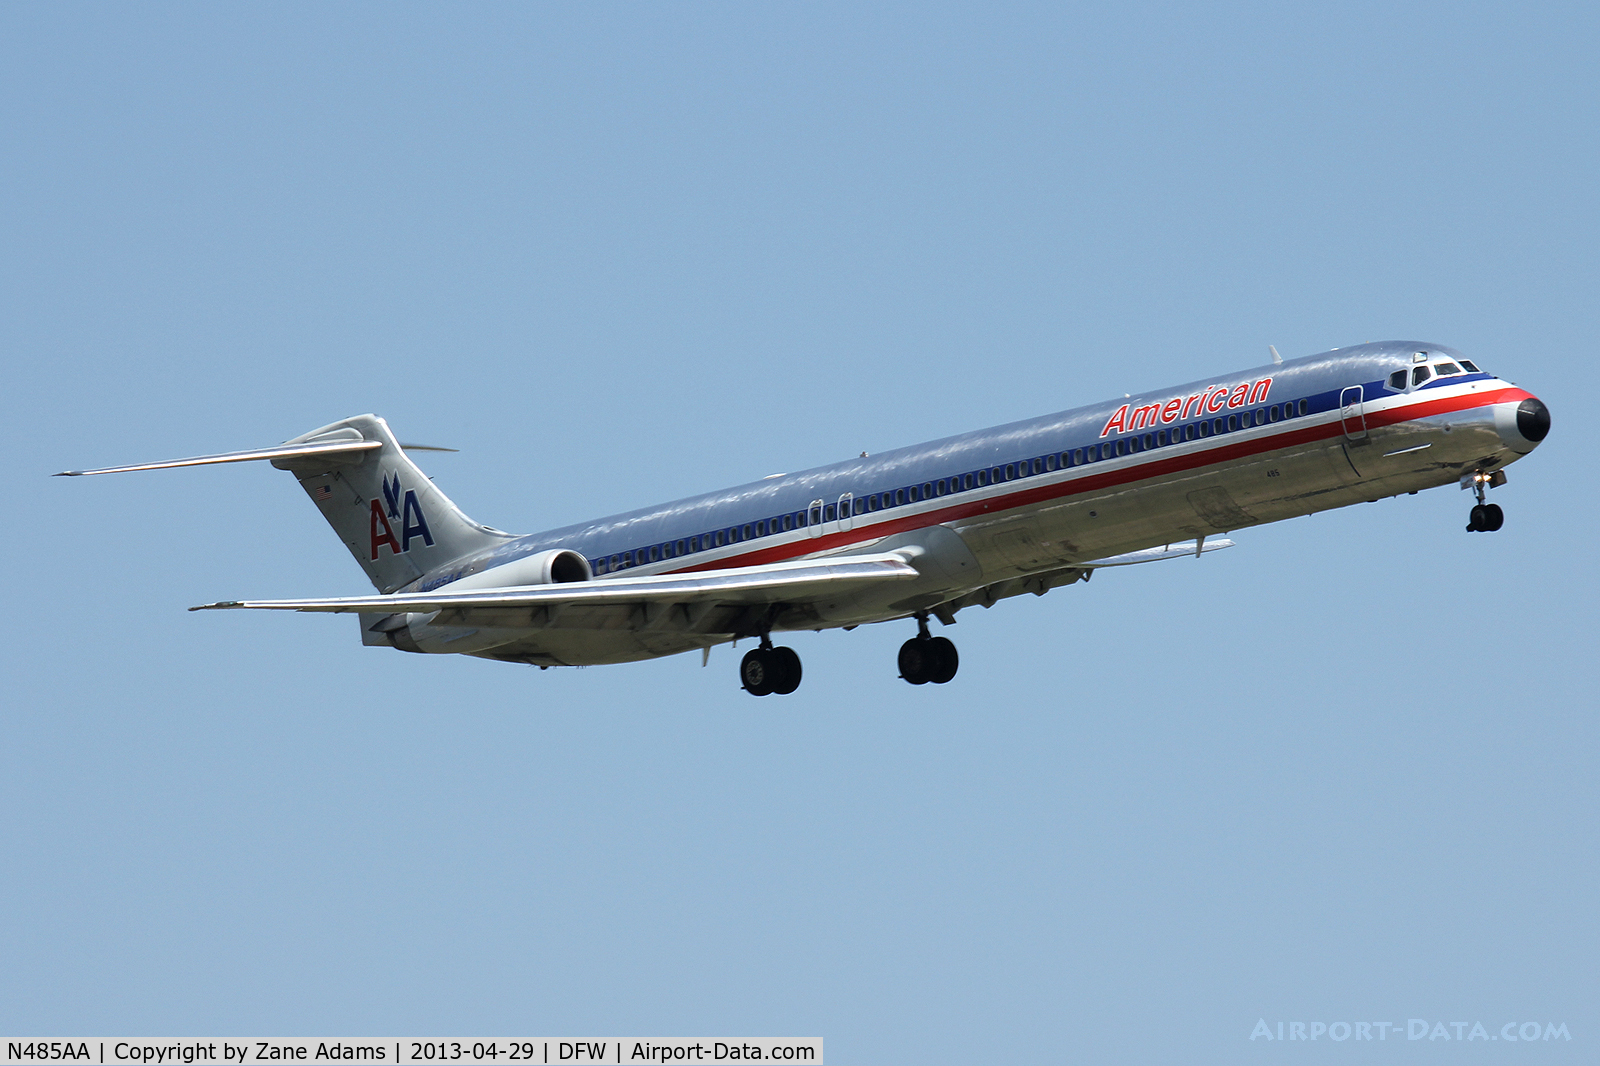 N485AA, 1988 McDonnell Douglas MD-82 (DC-9-82) C/N 49678, American Airlines landing at DFW Airport